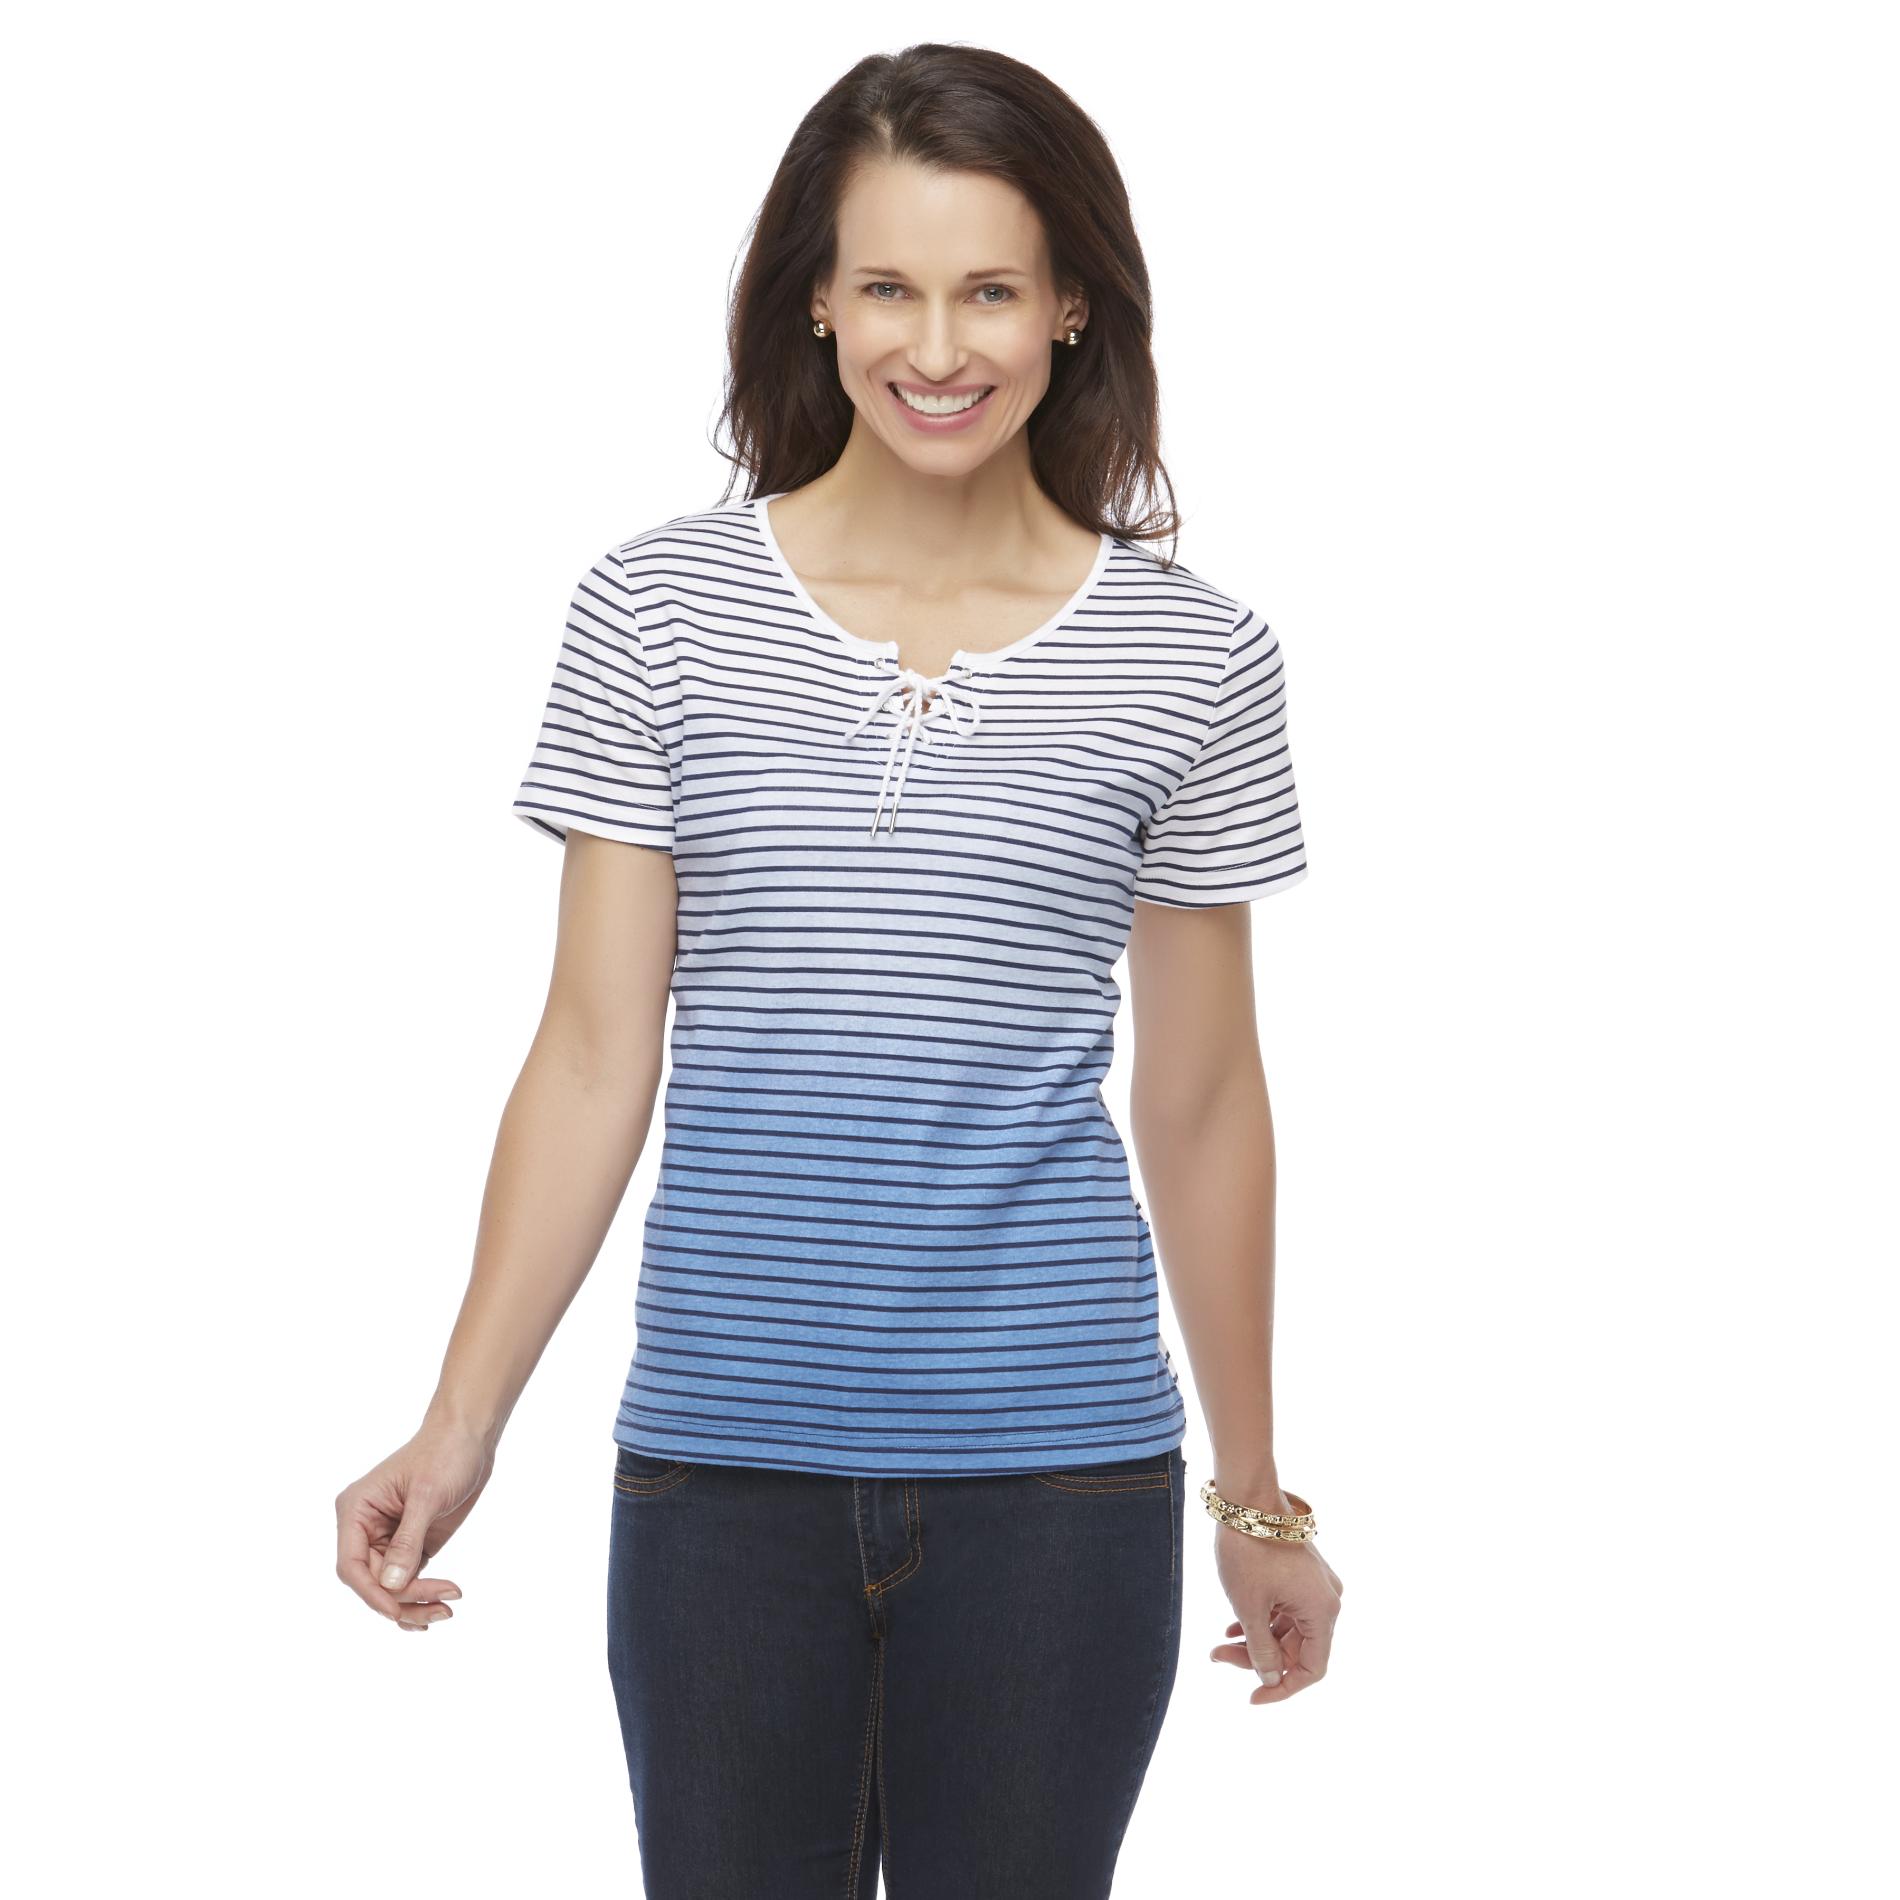 Basic Editions Women's Ombre T-Shirt - Striped